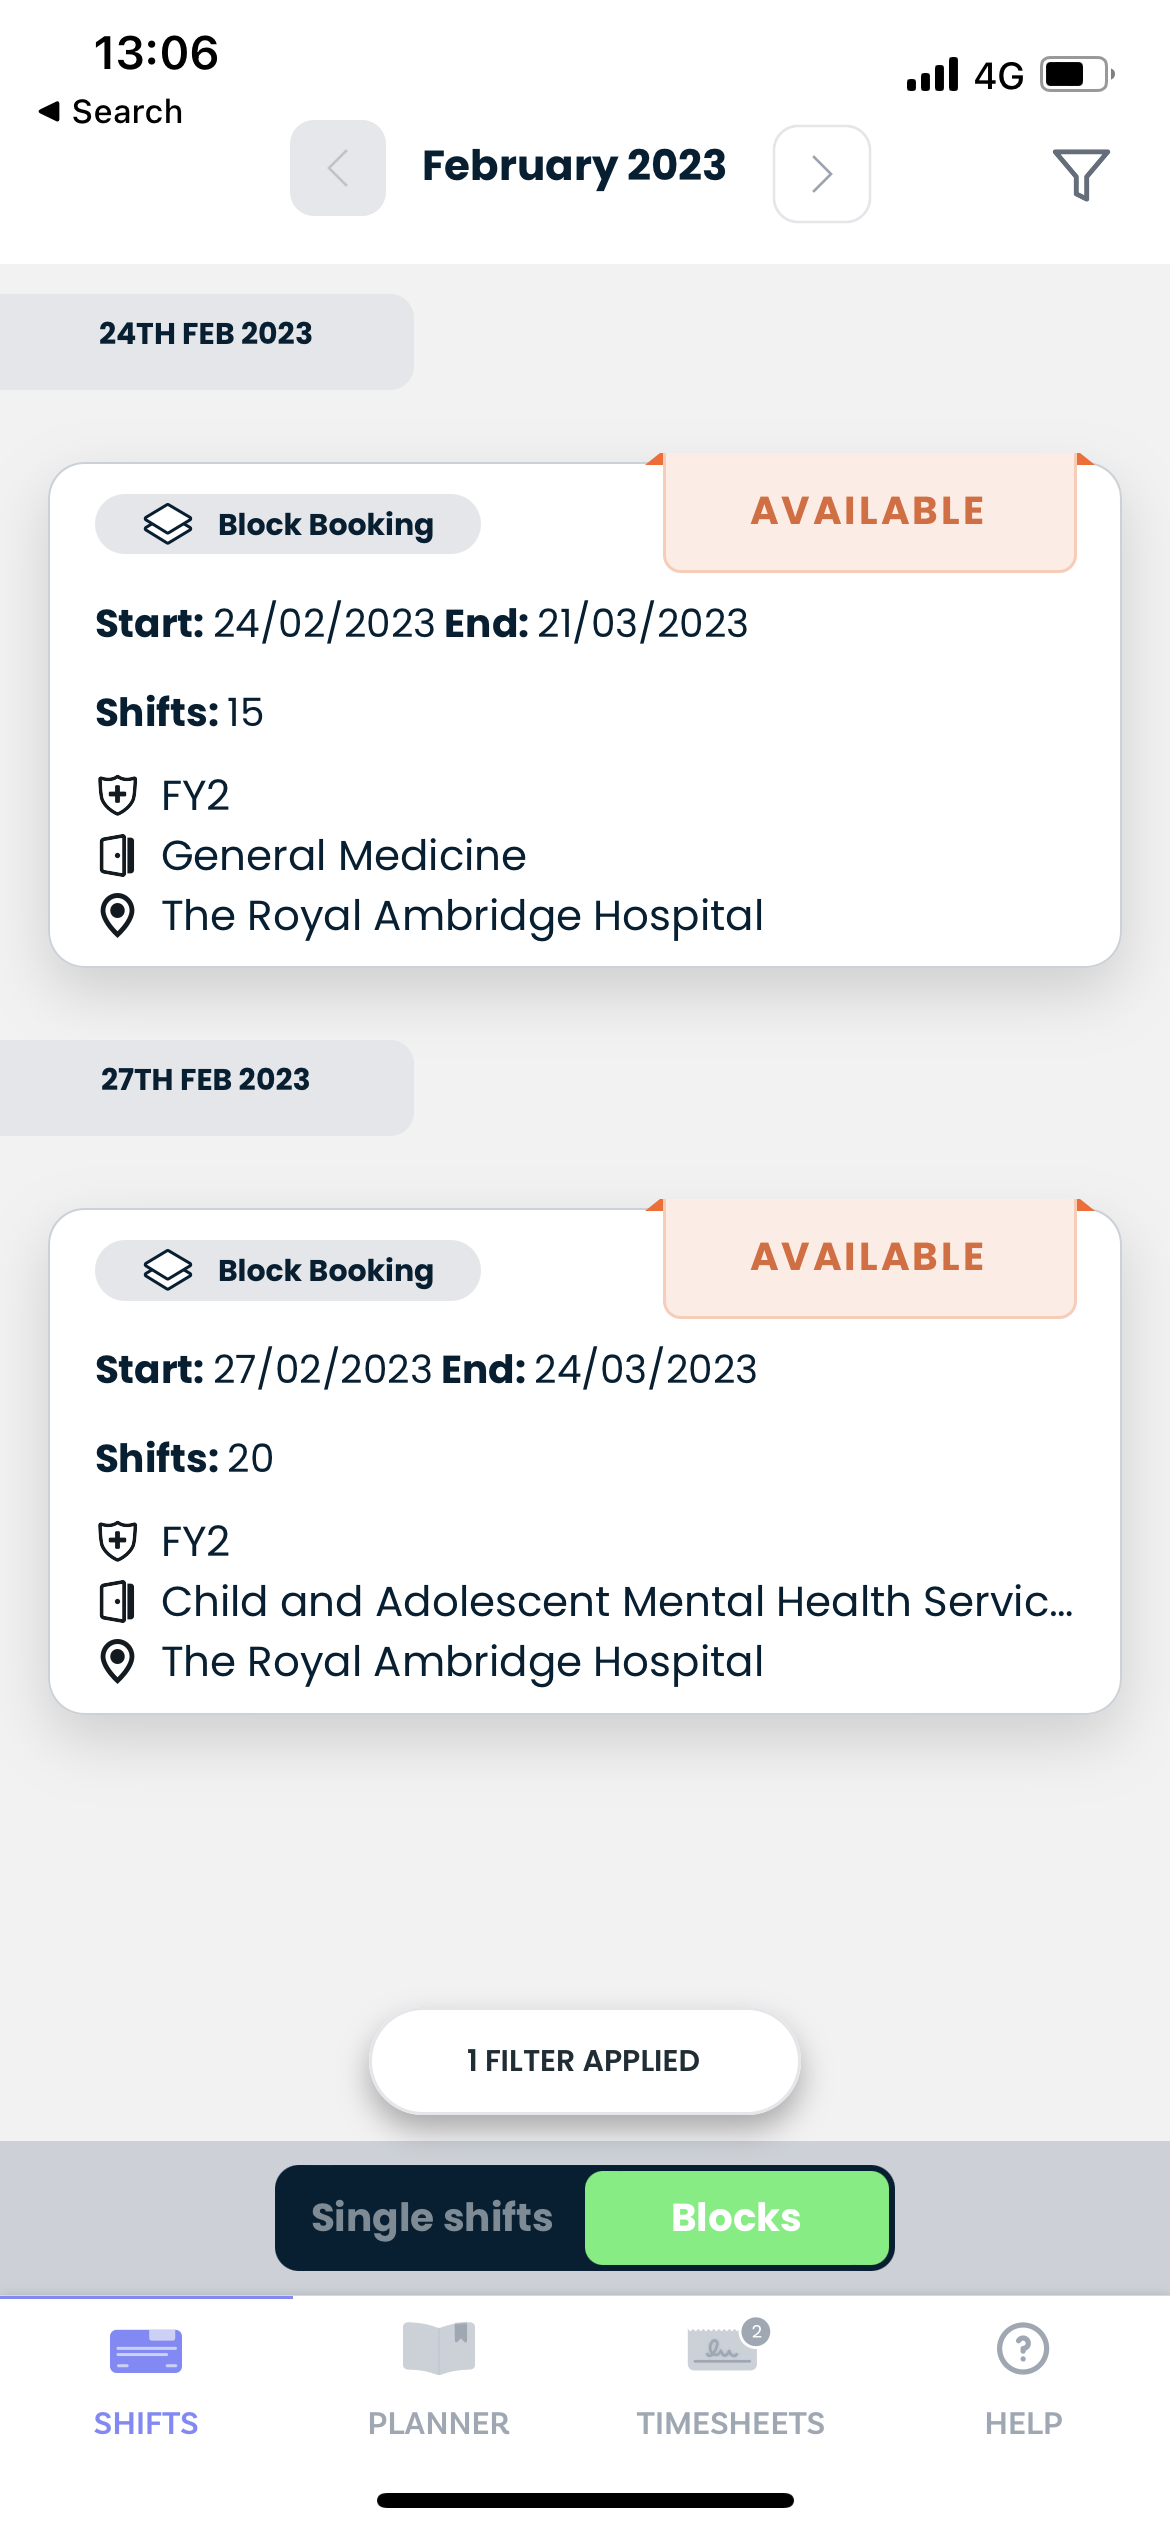 Block bookings are clearly indicated within the shift modal.